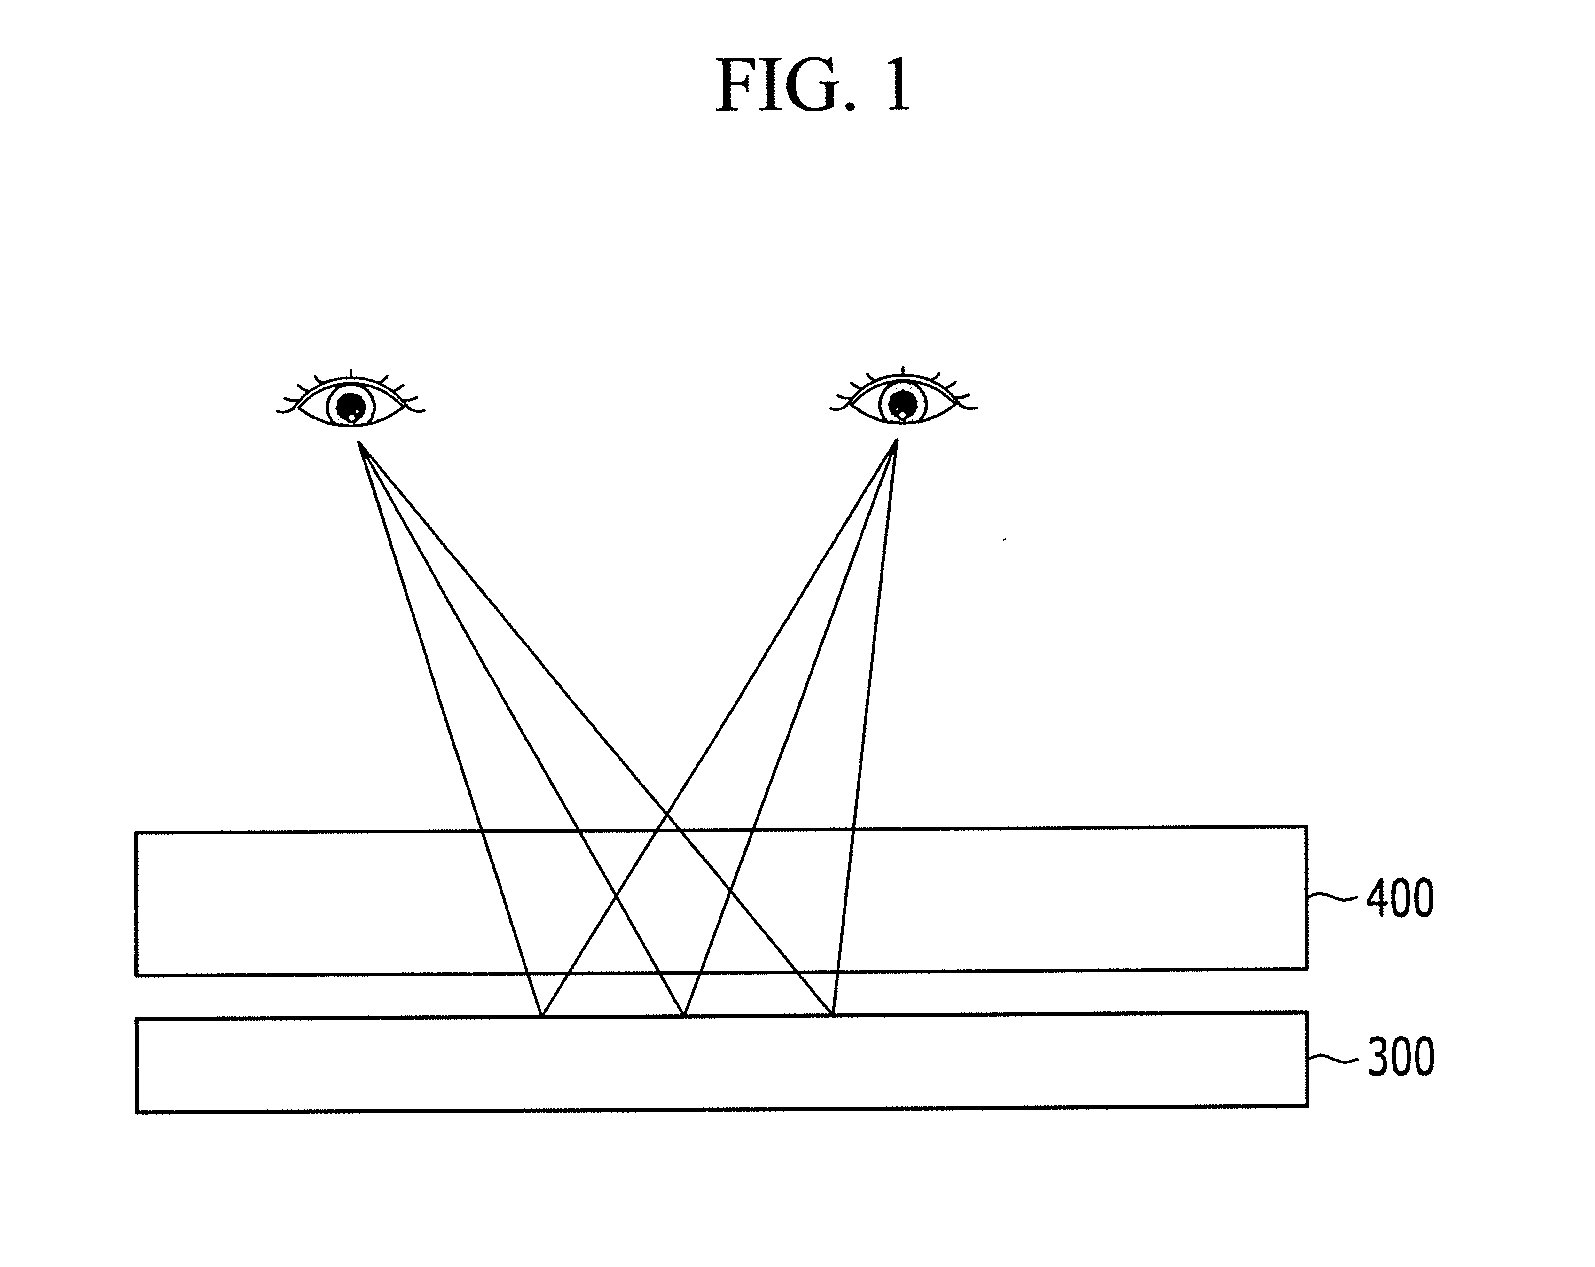 Image display device using diffractive device